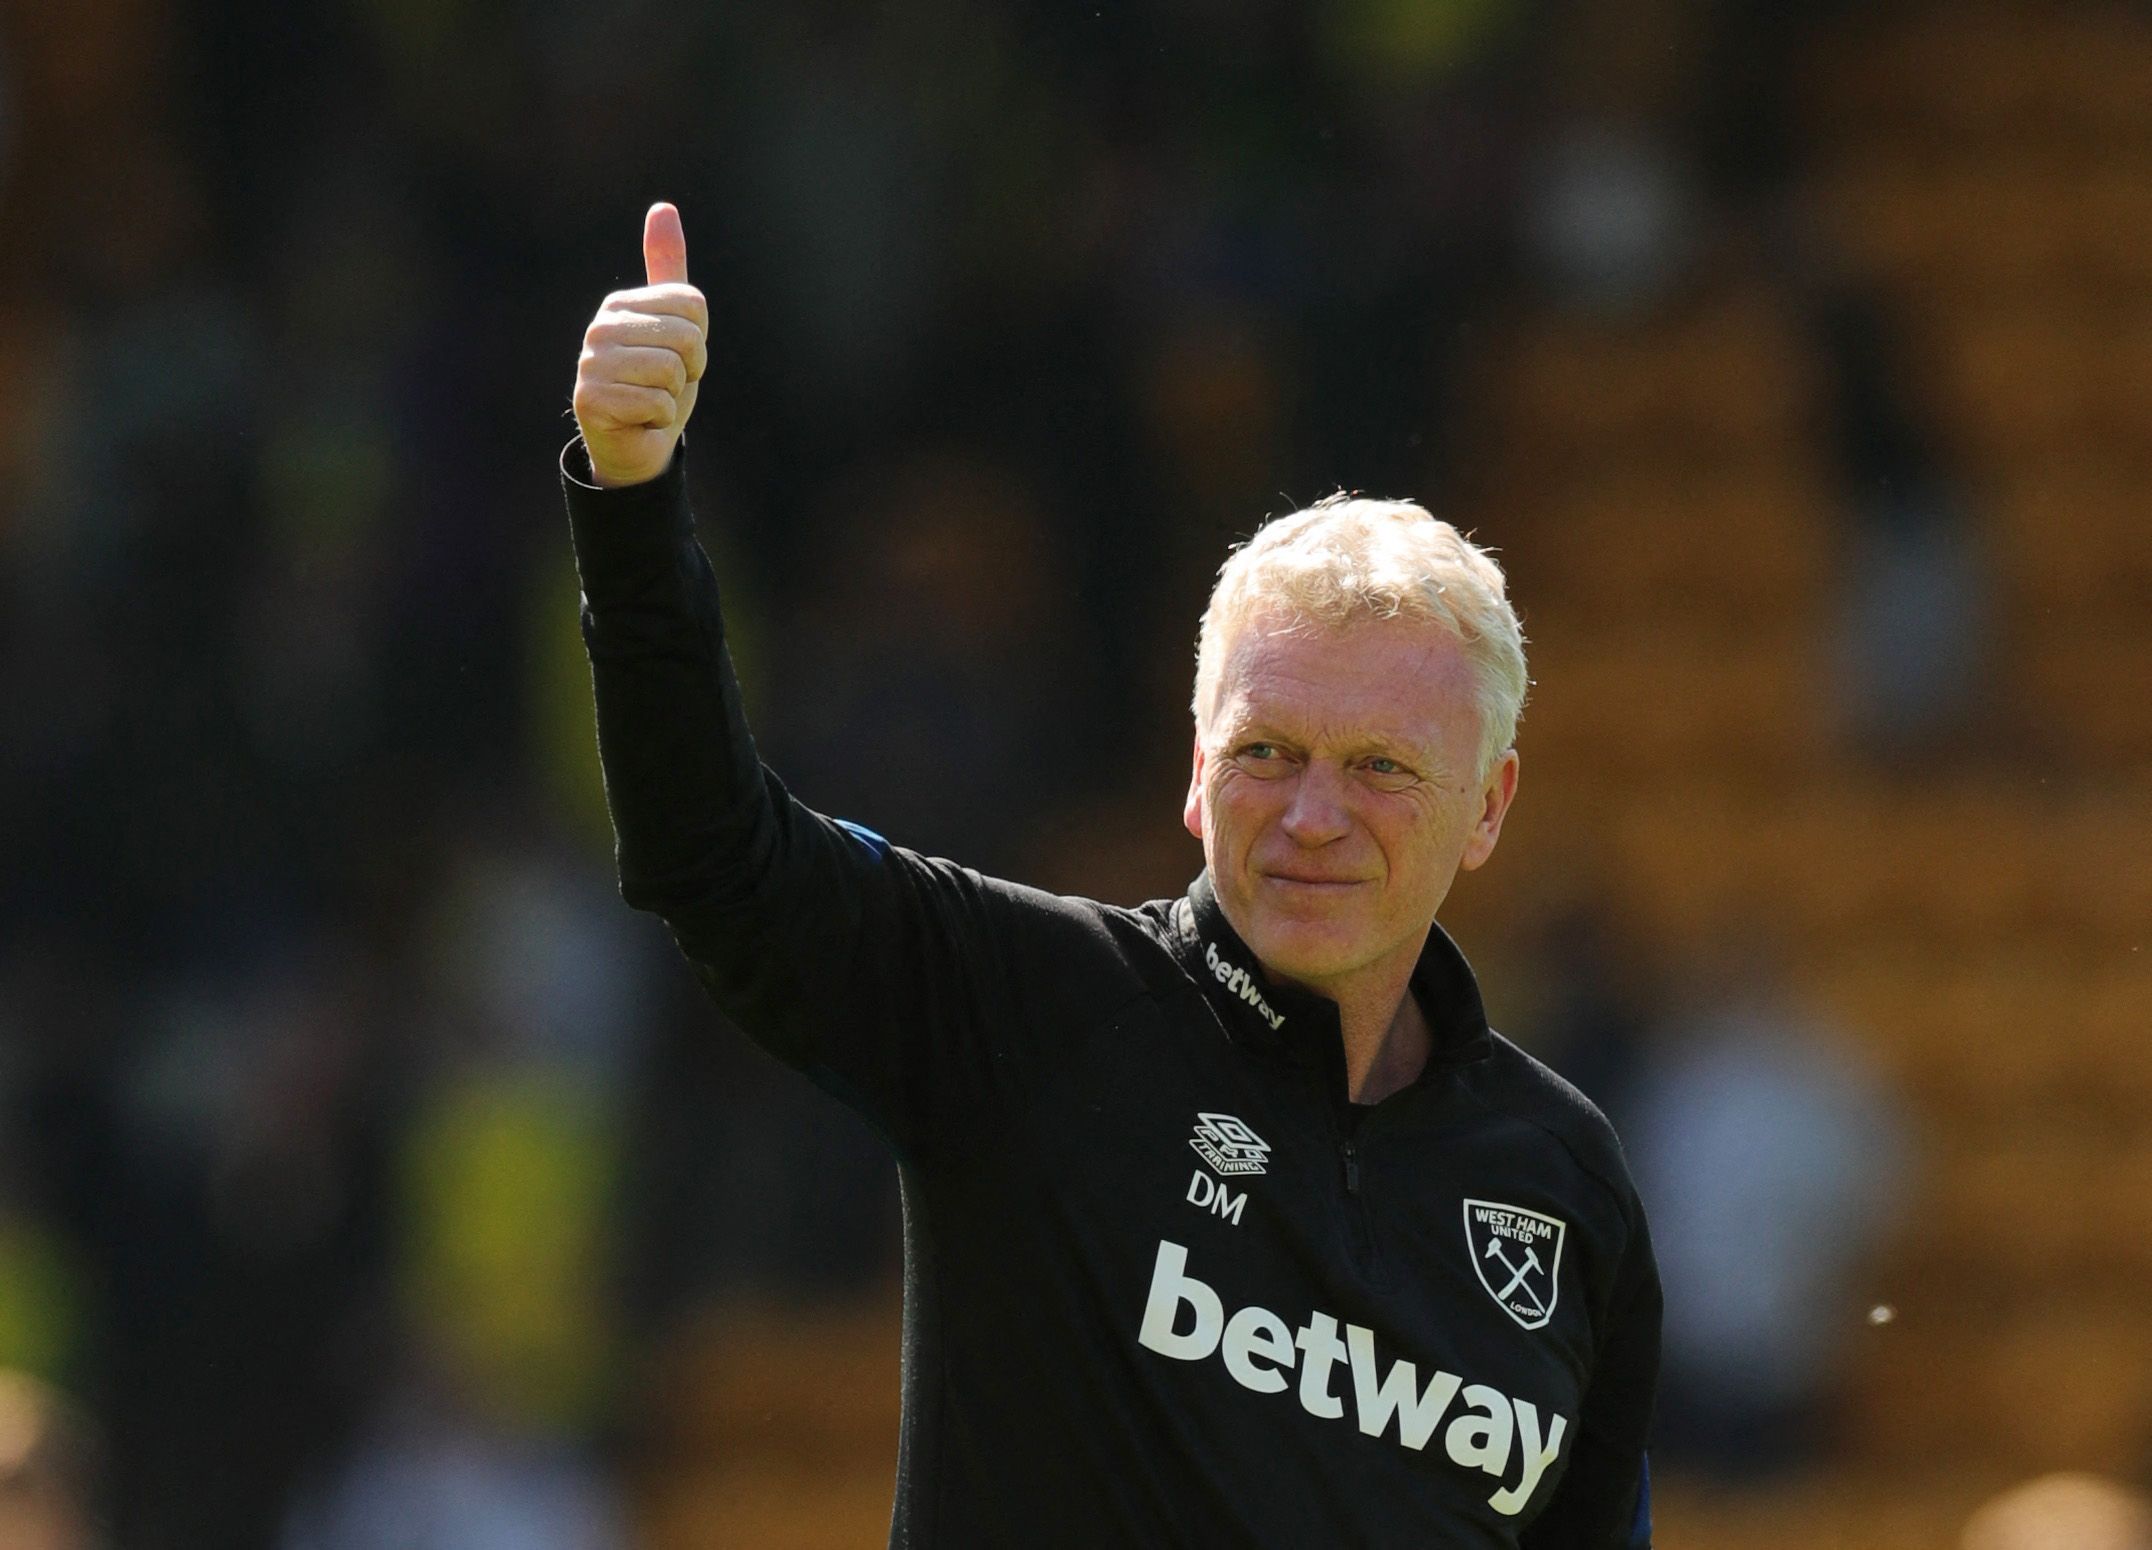 Soccer Football - Premier League - Norwich City v West Ham United - Carrow Road, Norwich, Britain - May 8, 2022 West Ham United manager David Moyes acknowledges fans after the match REUTERS/Chris Radburn EDITORIAL USE ONLY. No use with unauthorized audio, video, data, fixture lists, club/league logos or 'live' services. Online in-match use limited to 75 images, no video emulation. No use in betting, games or single club /league/player publications.  Please contact your account representative for